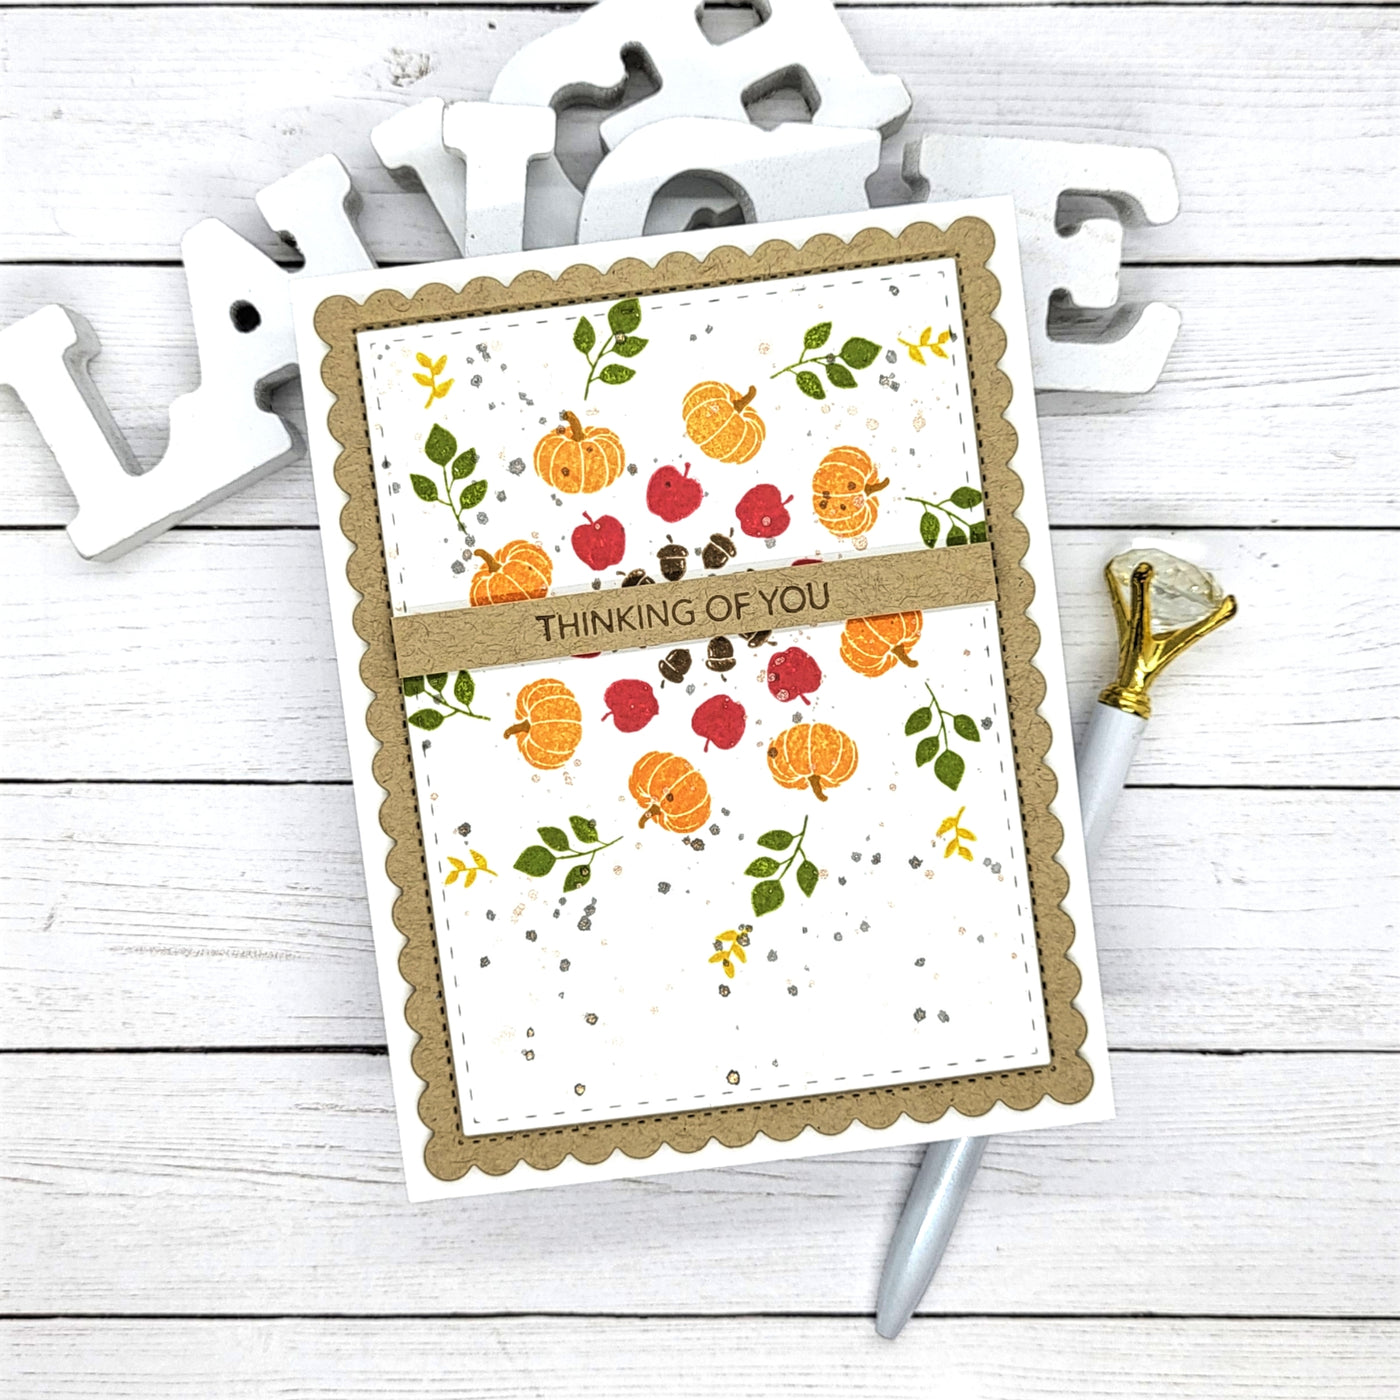 Holiday Floral 6x8 Stamps – LDRS Creative